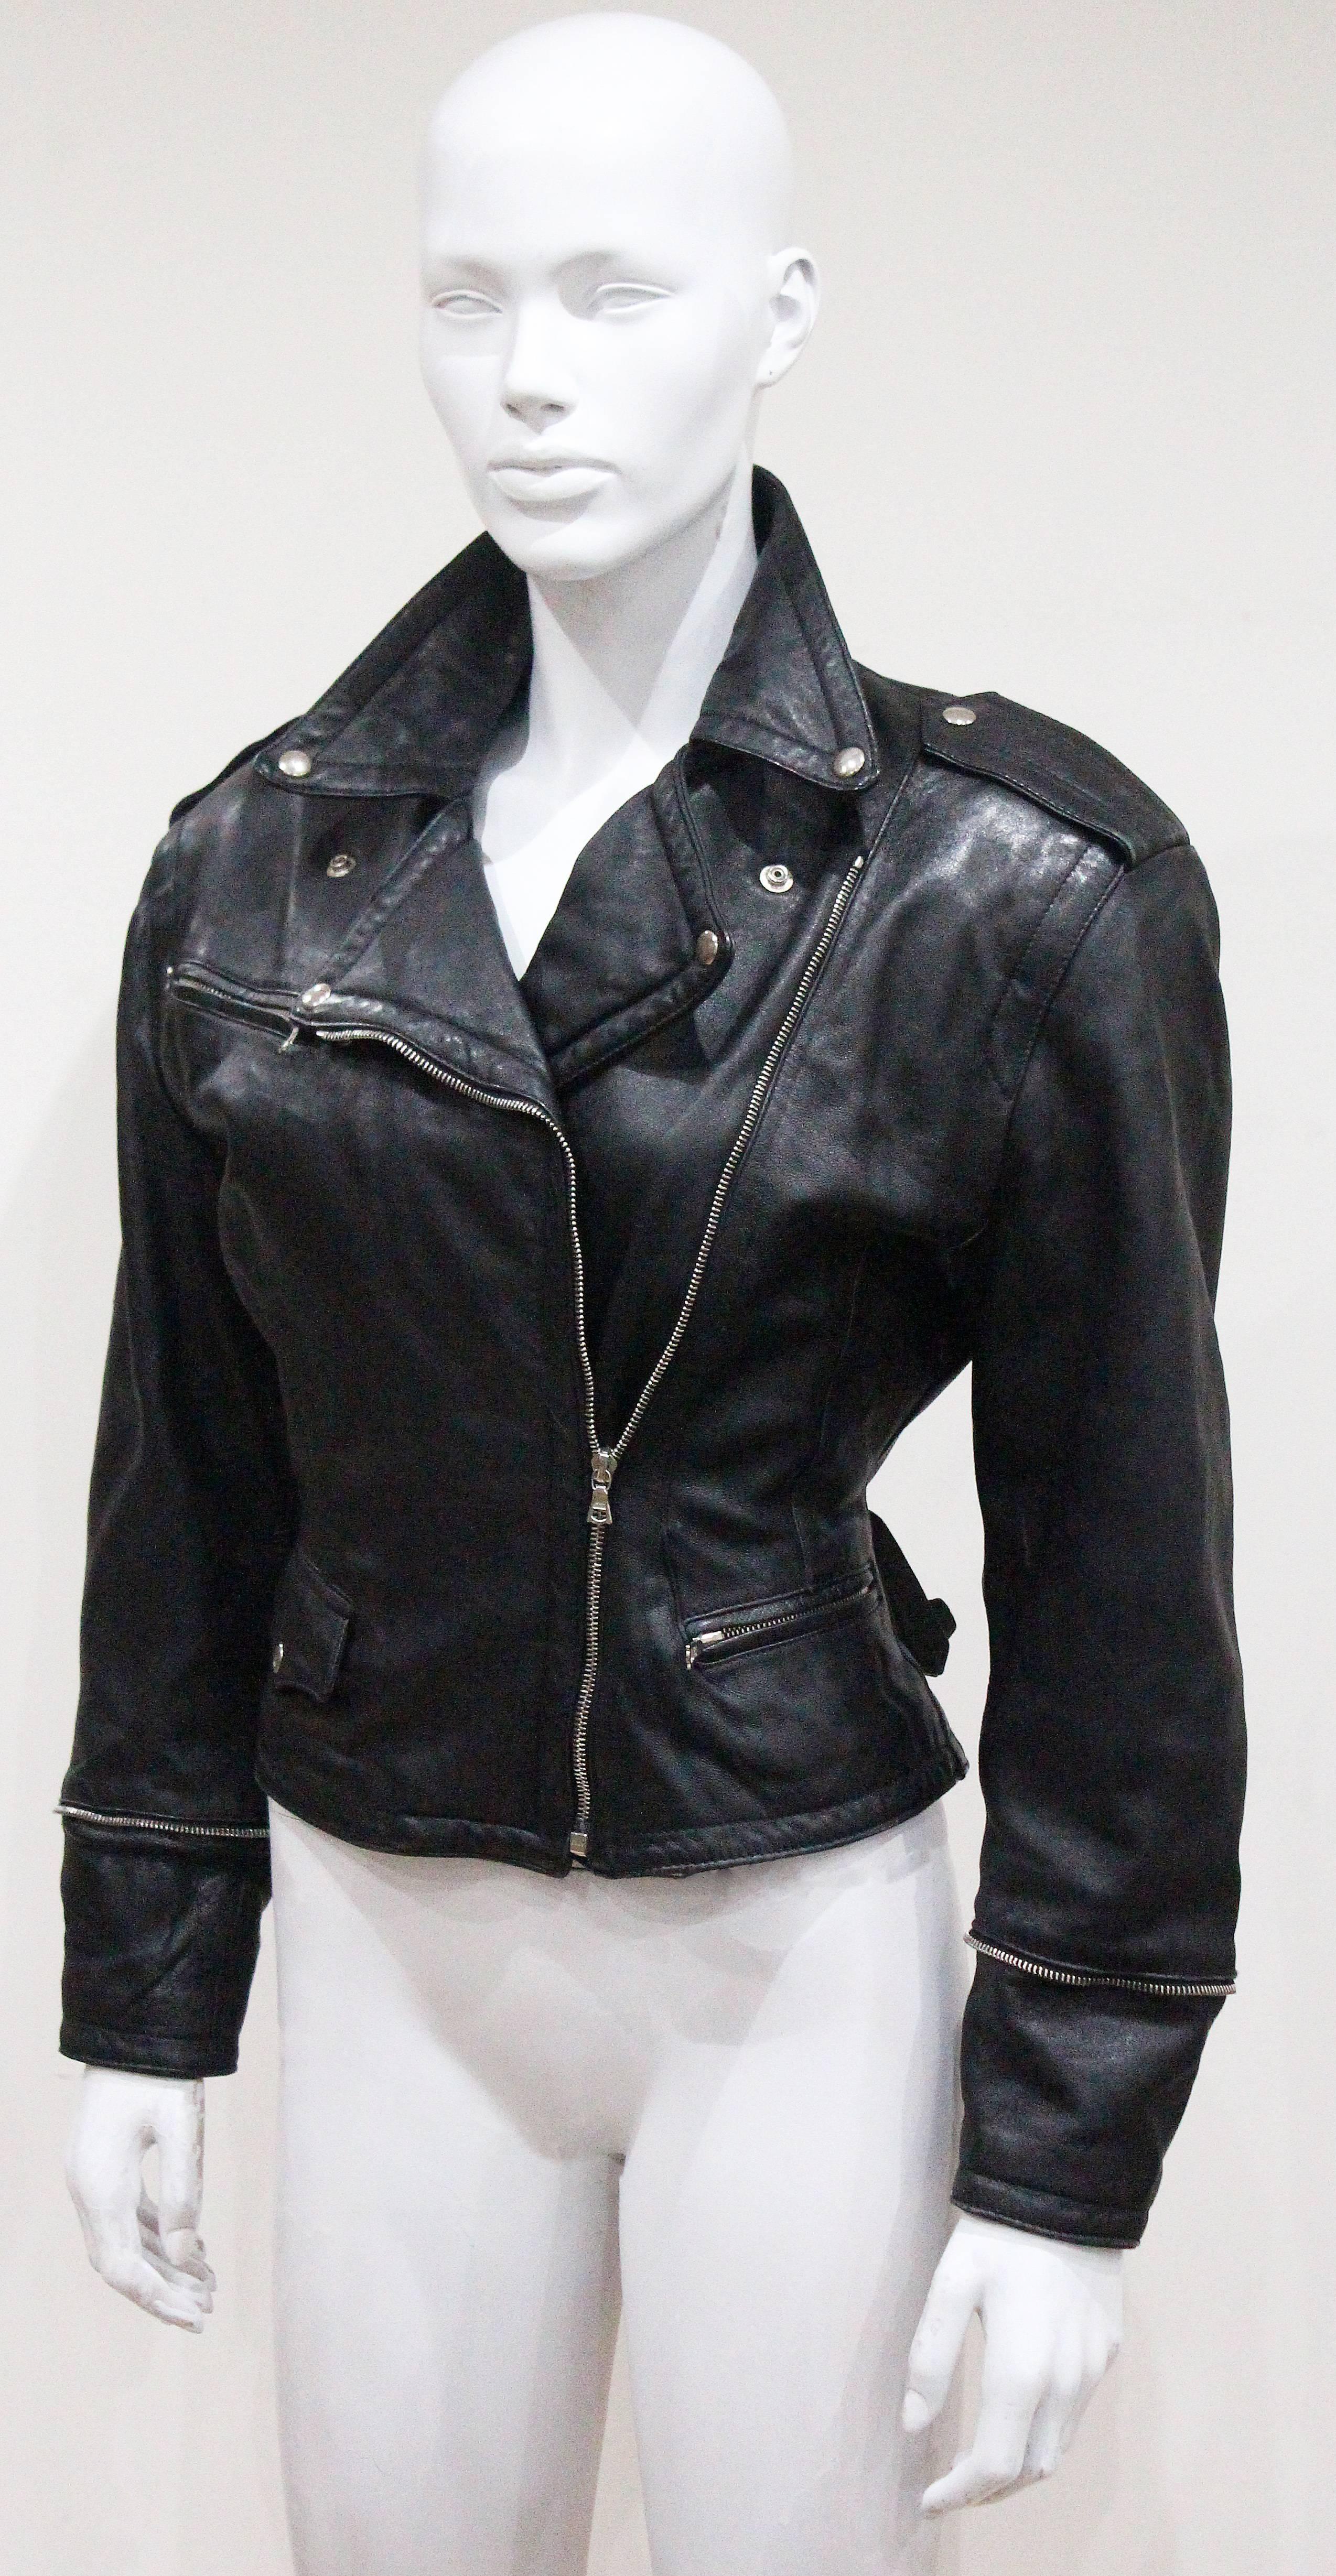 Black Josyln Clarke leather motorcycle jacket with attached gloves, c. 1980s